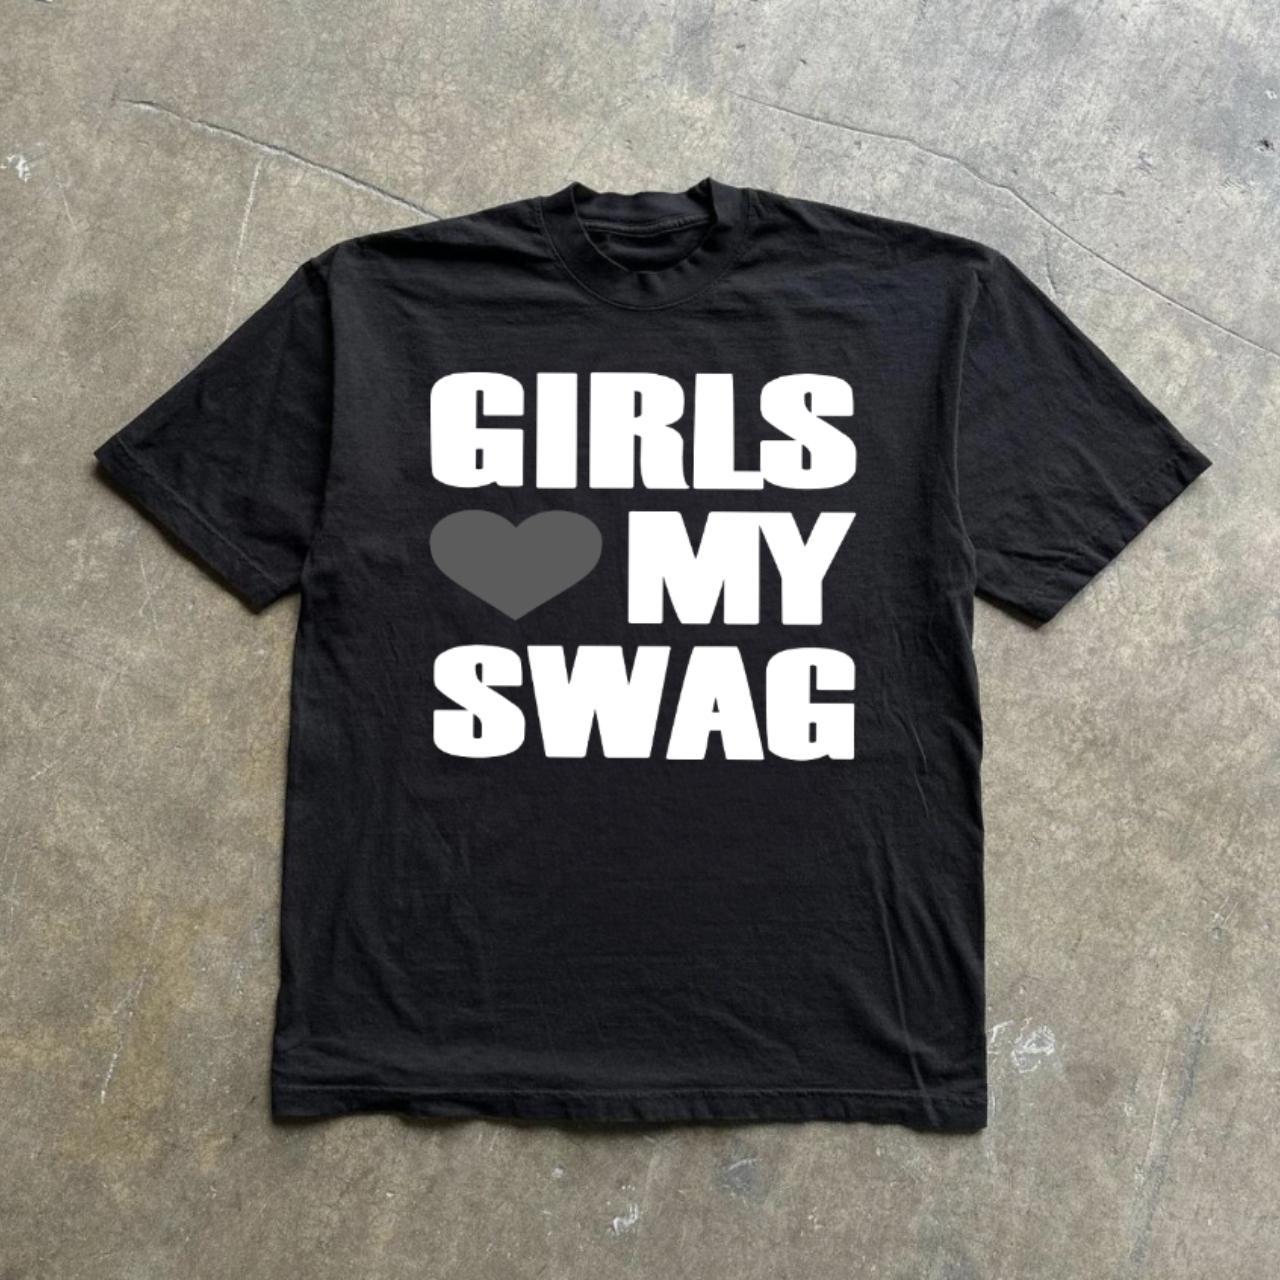 GIRLS <3 MY SWAG text tee *FREE SHIPPING ON - Depop